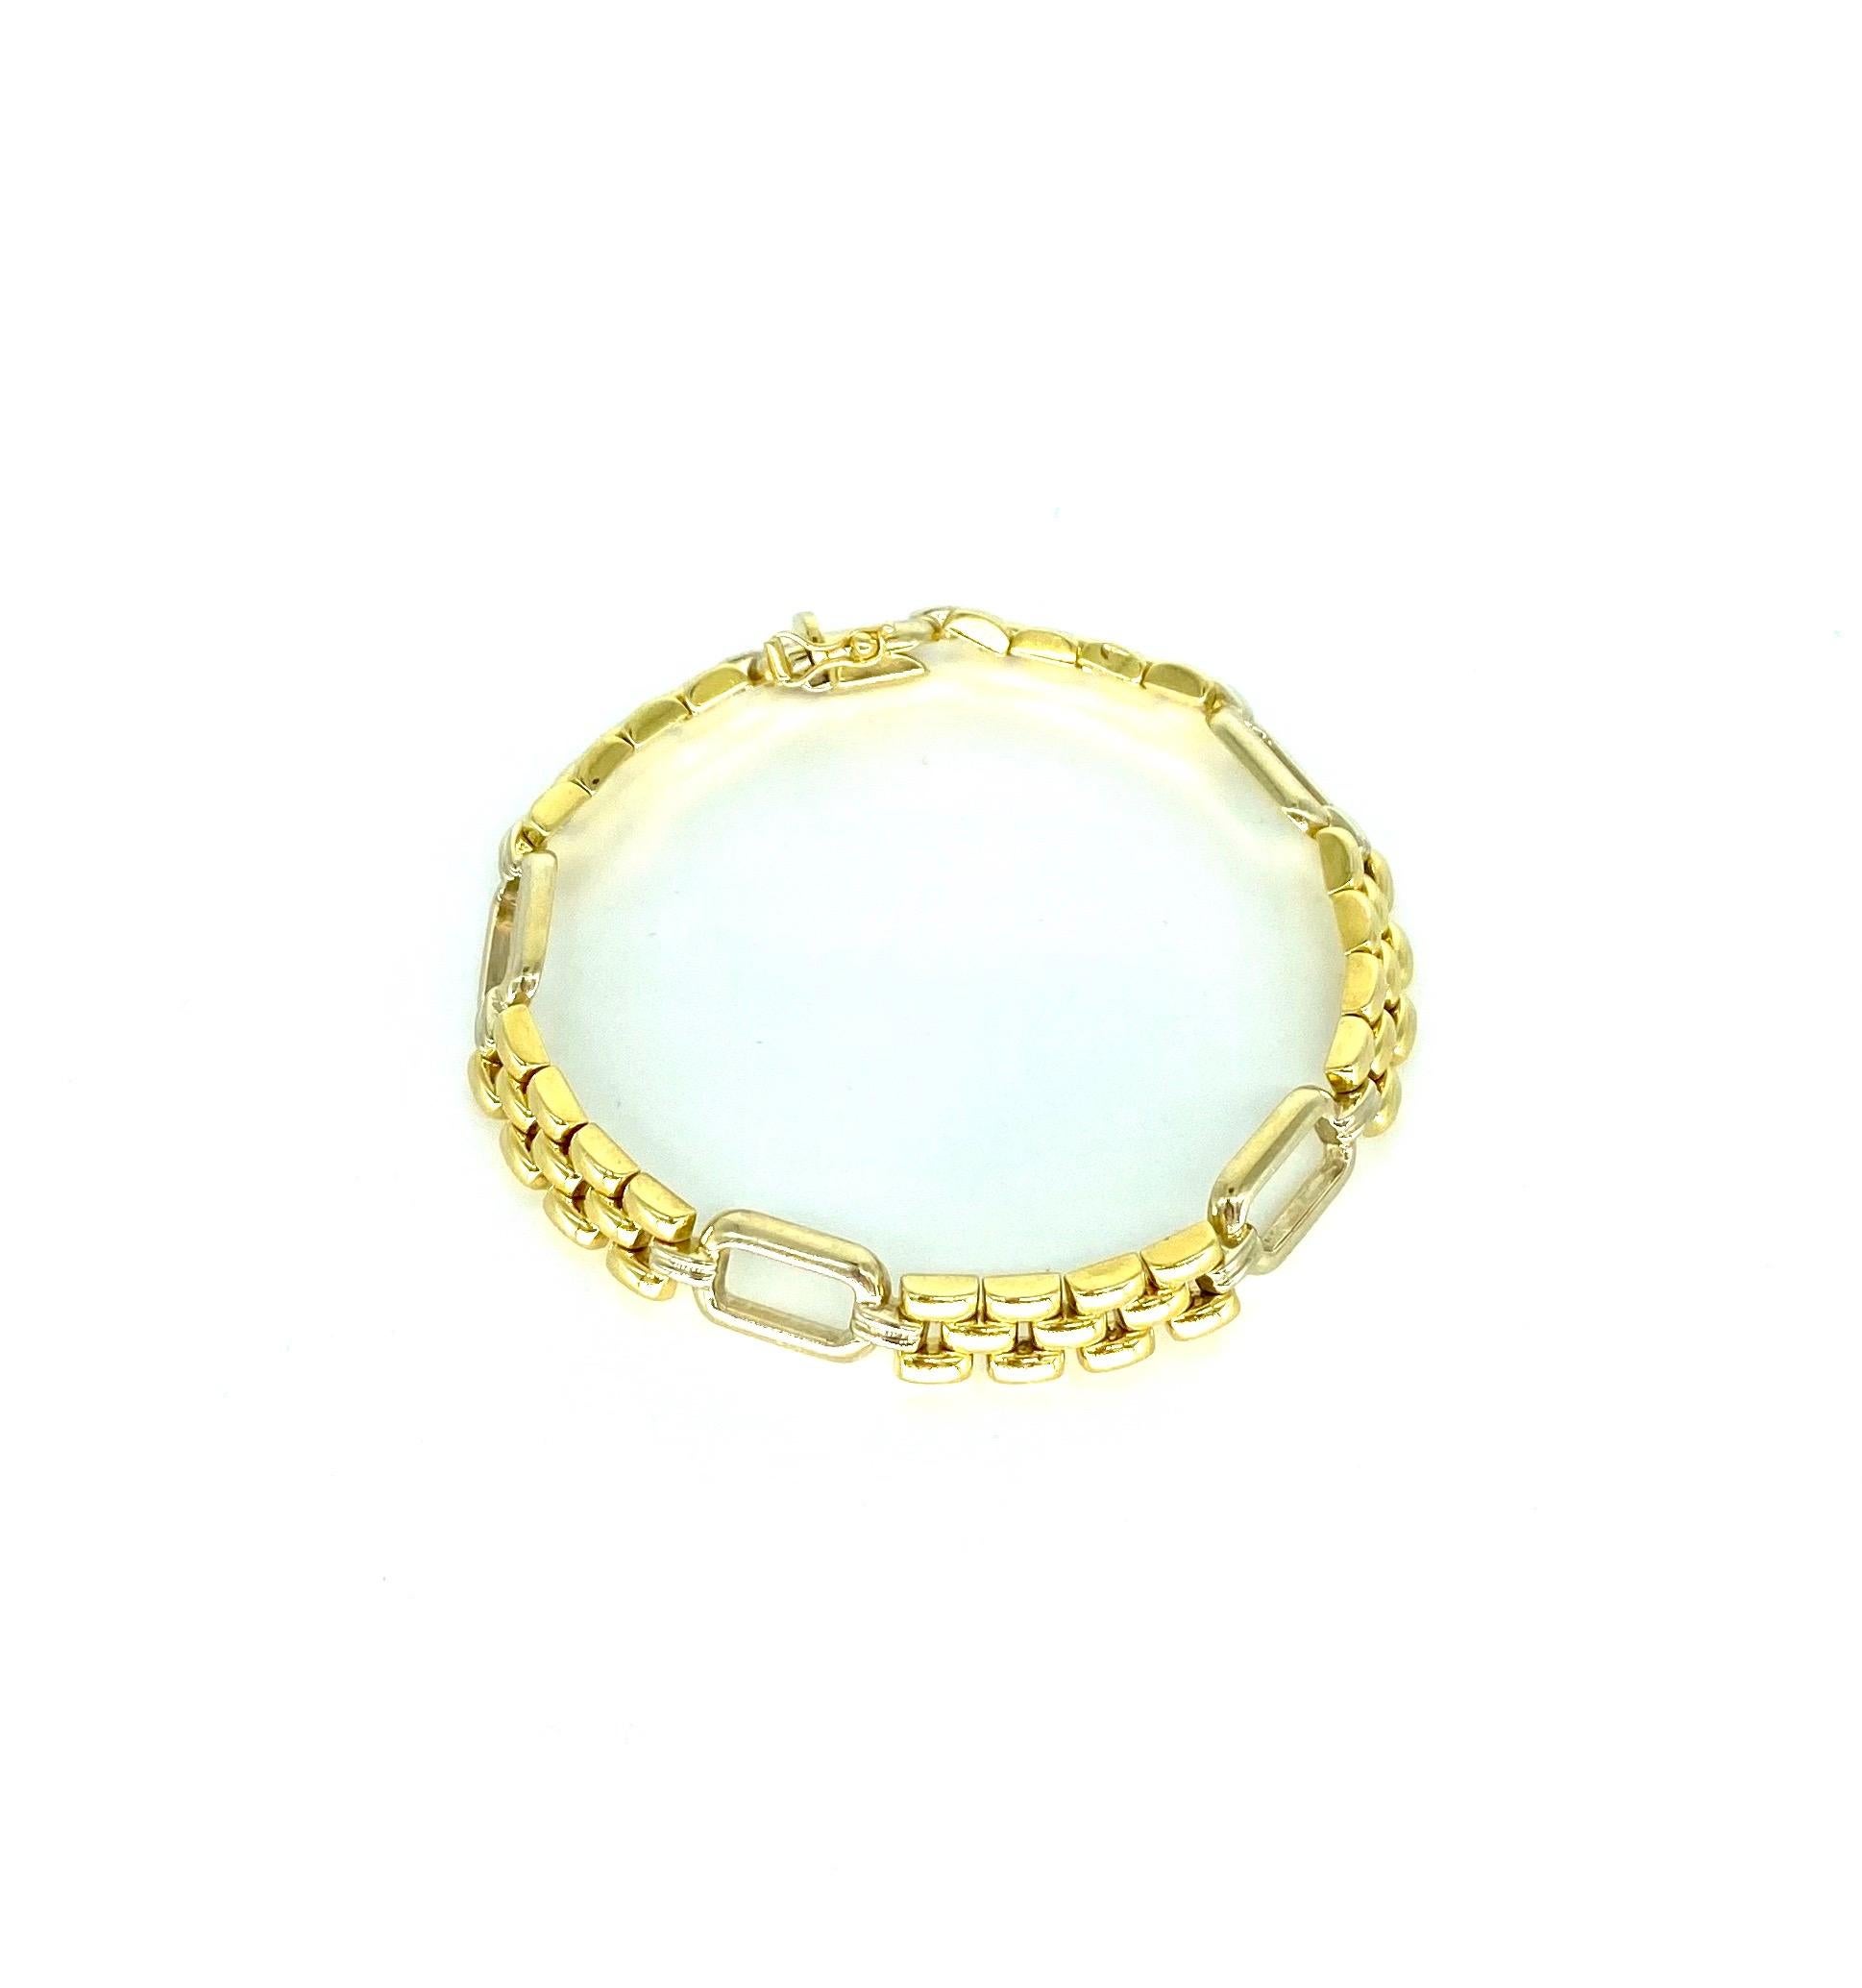 Vintage Italian Designer Fancy 2-Tone Link Bracelet 18k Gold. Beautiful crafted bracelet in both white gold and yellow gold throughout. Open frame design and special links across the entire bracelet making it standout significantly. The Bracelet